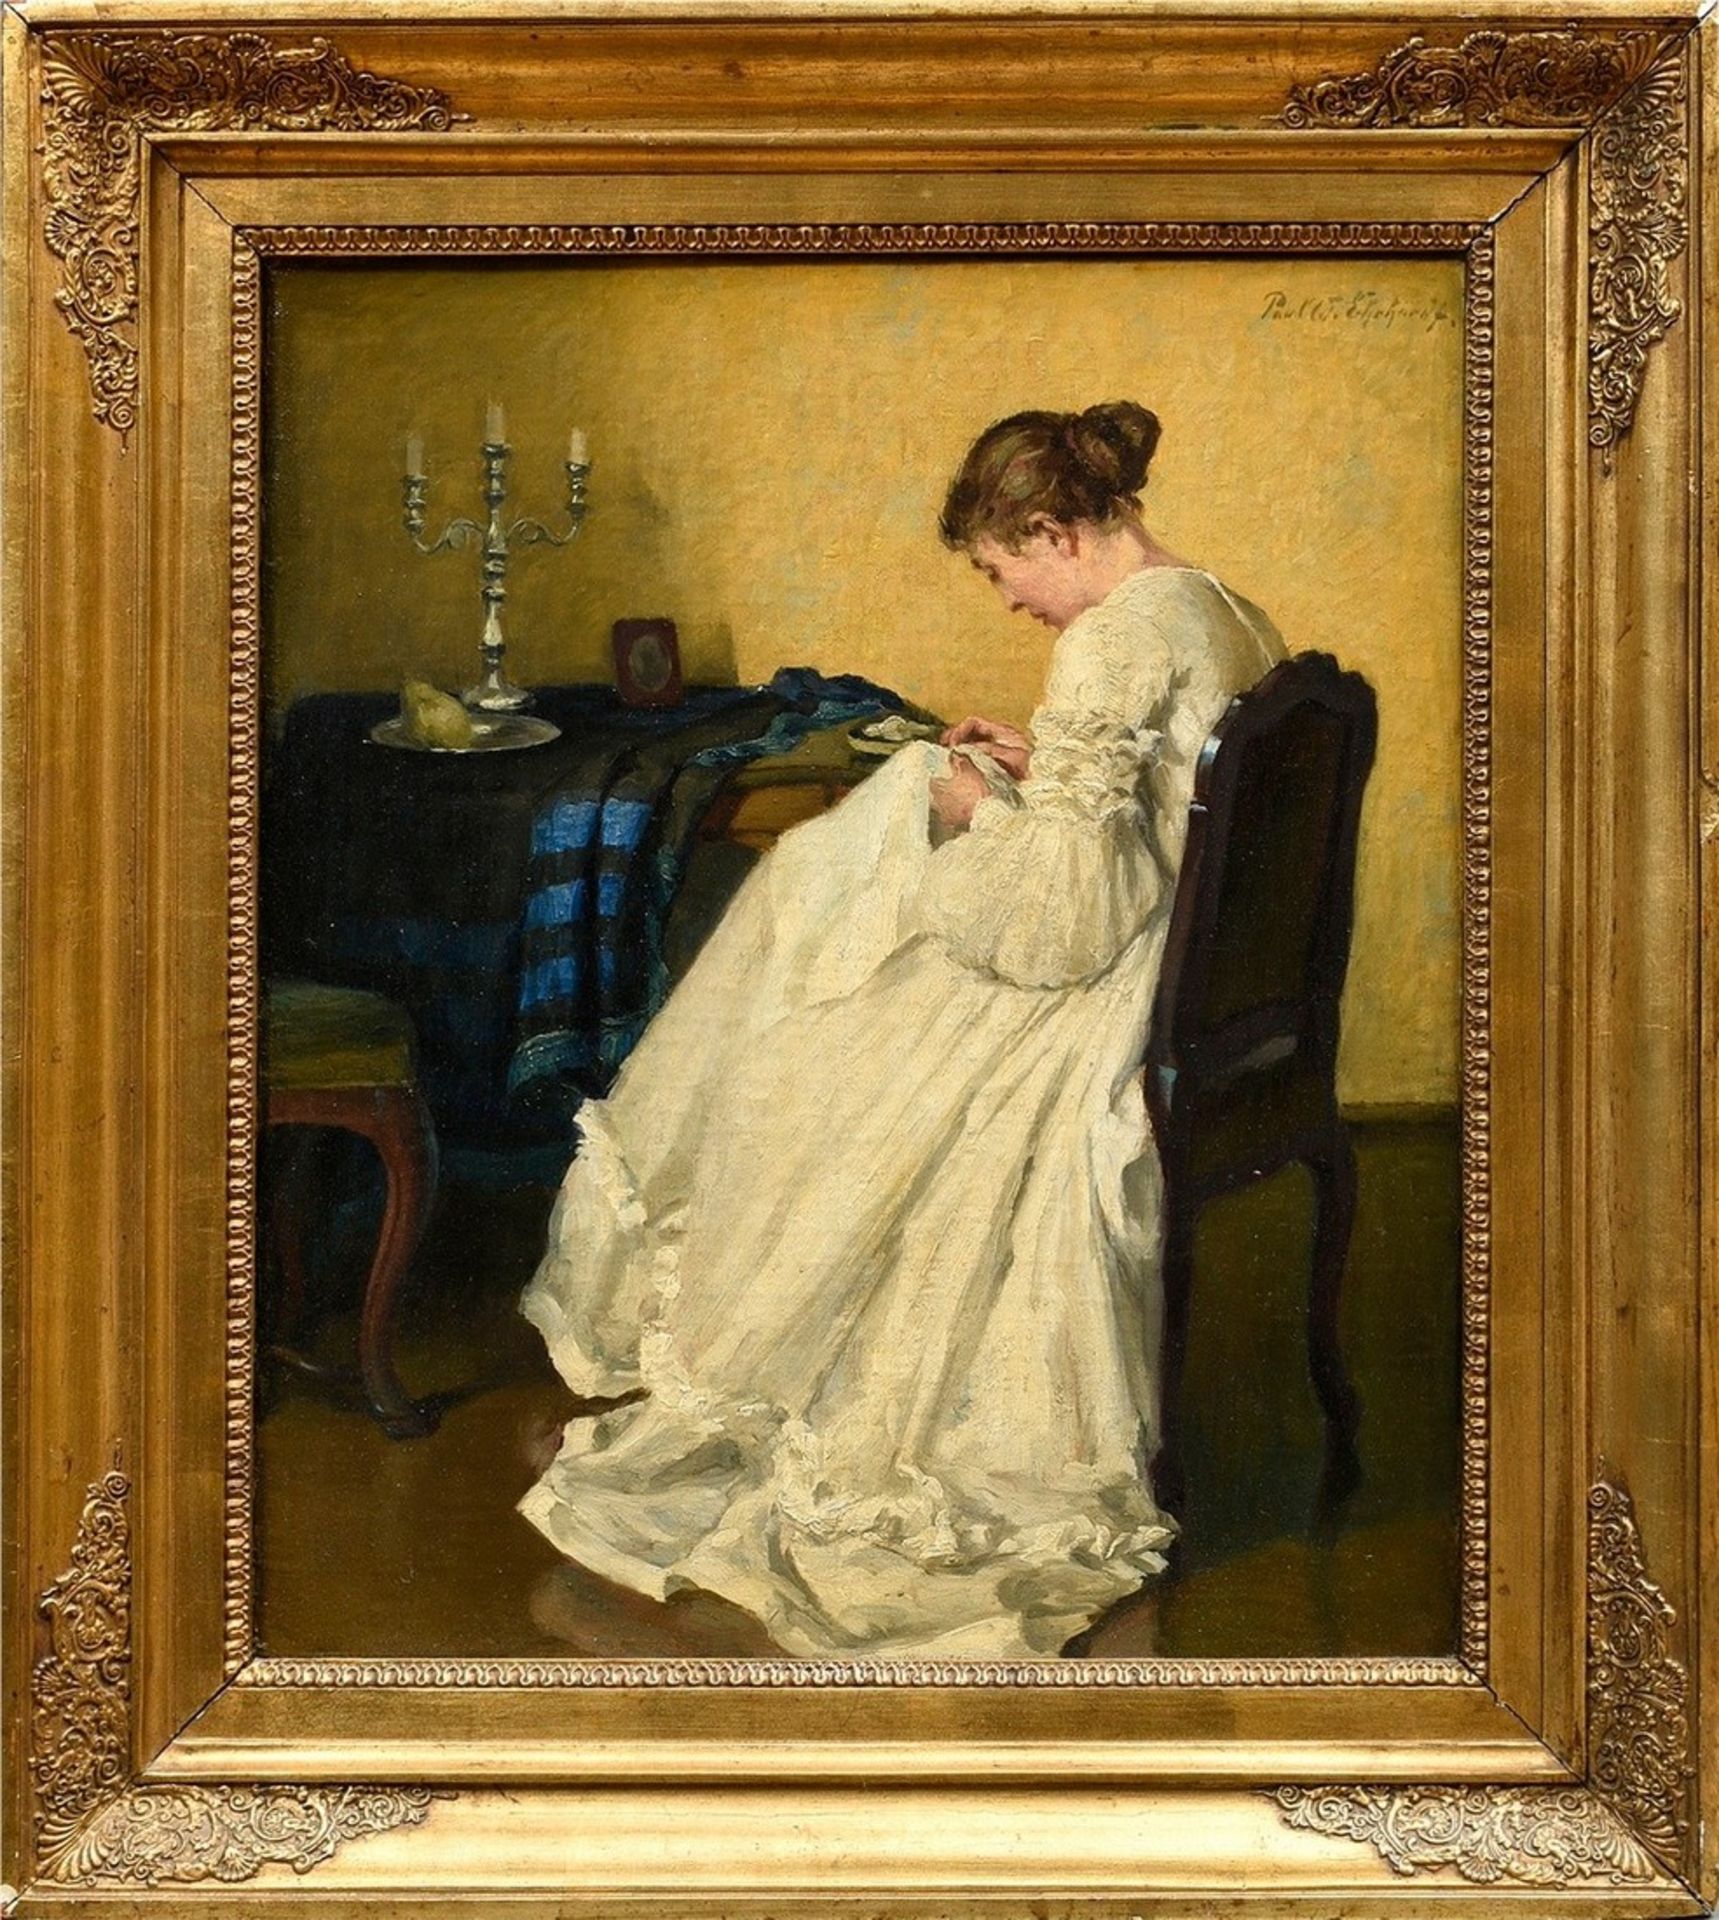 Ehrhardt, Paul Walter (1872-1959) "Sewing" 1934, oil/canvas, sign. top .r., dat./marked/tit. on ver - Image 2 of 6